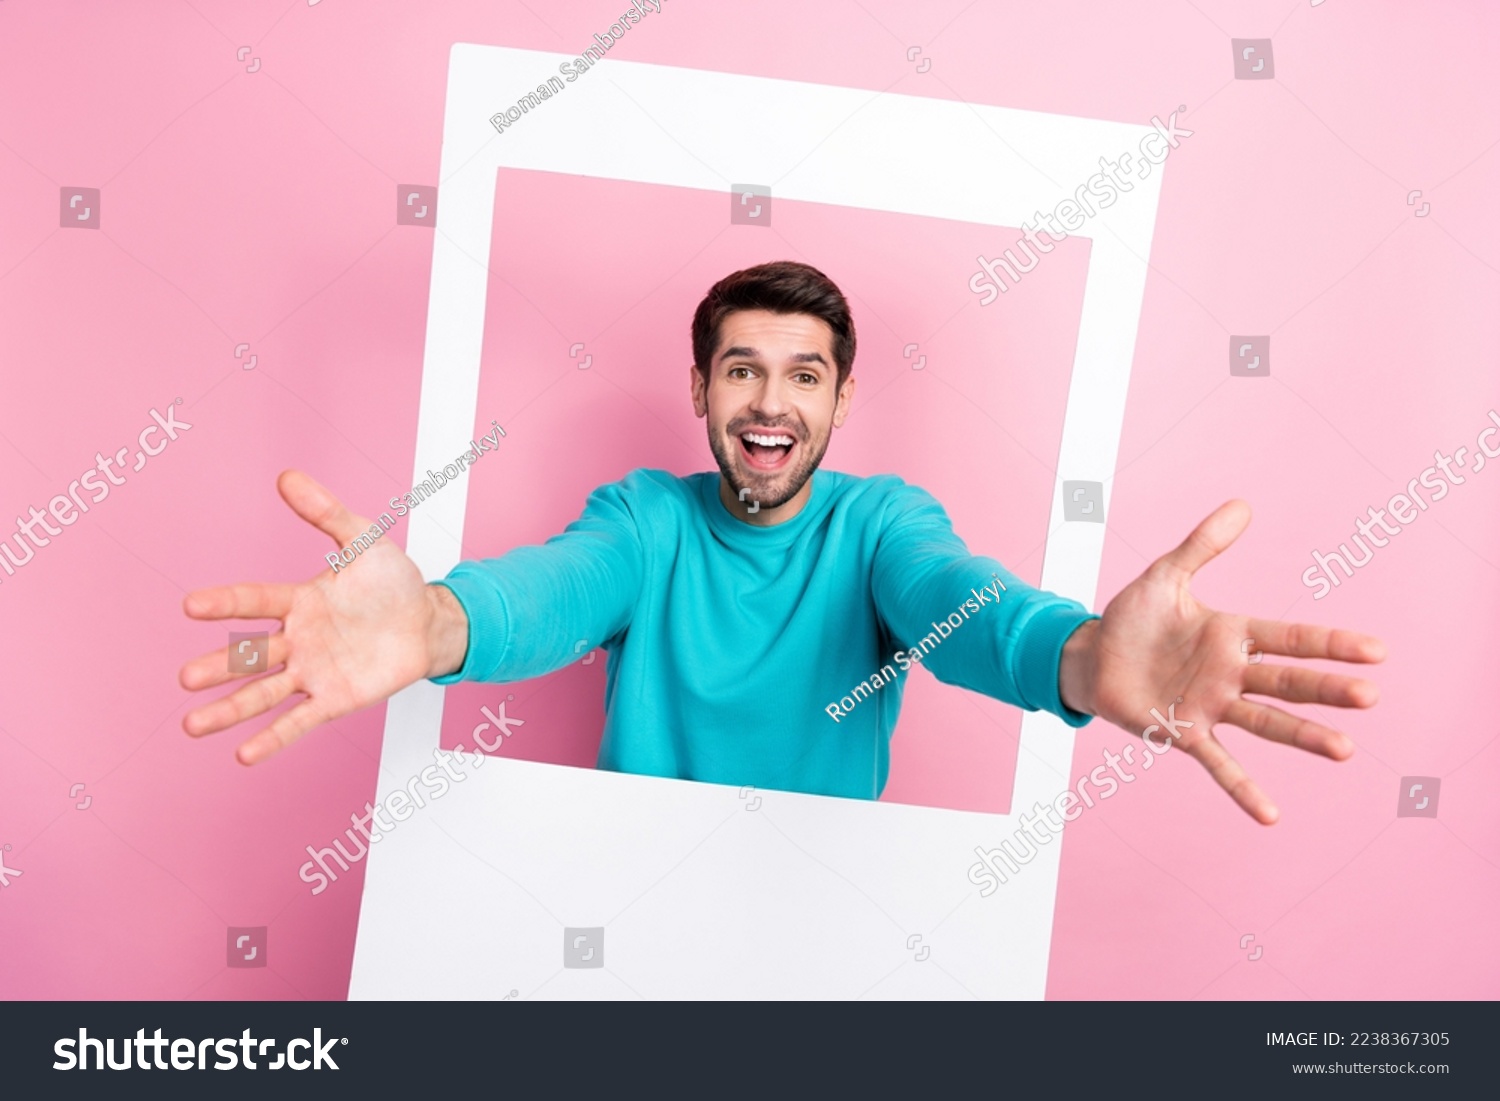 Photo portrait of attractive young man polaroid instant photo frame ready hug dressed stylish blue outfit isolated on pink color background #2238367305